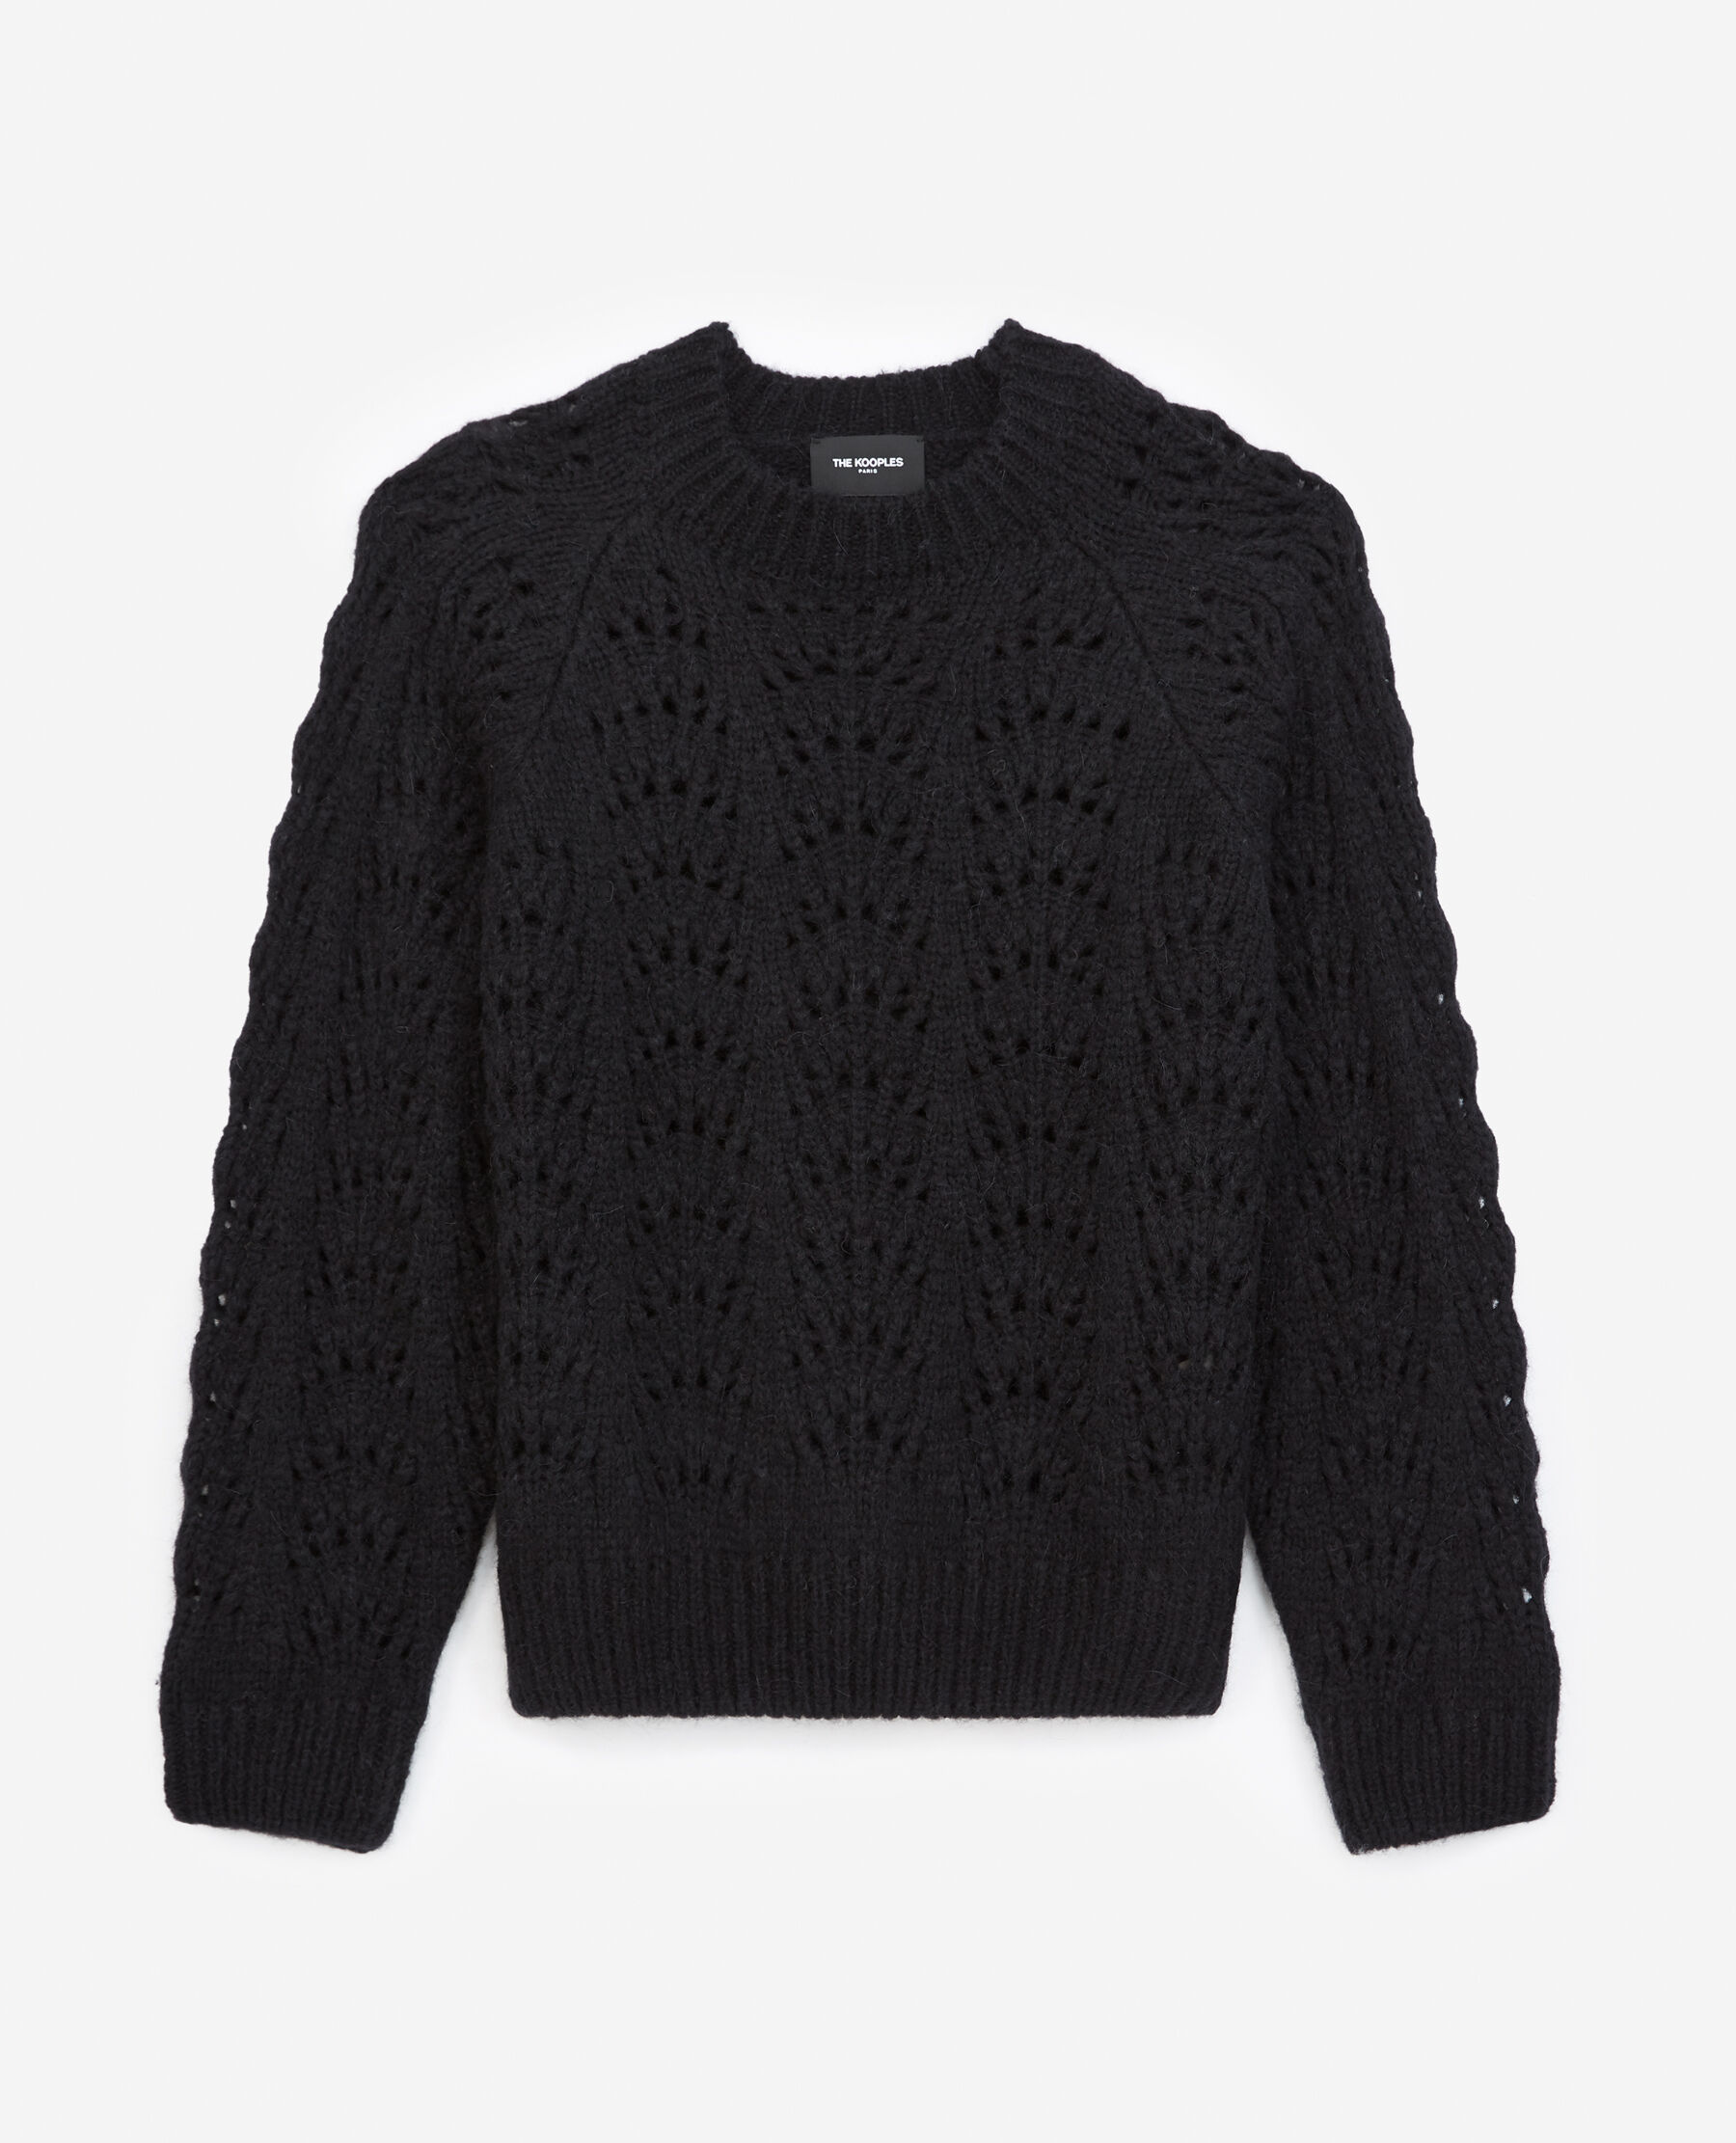 Knit black sweater with puffed sleeves | The Kooples - US